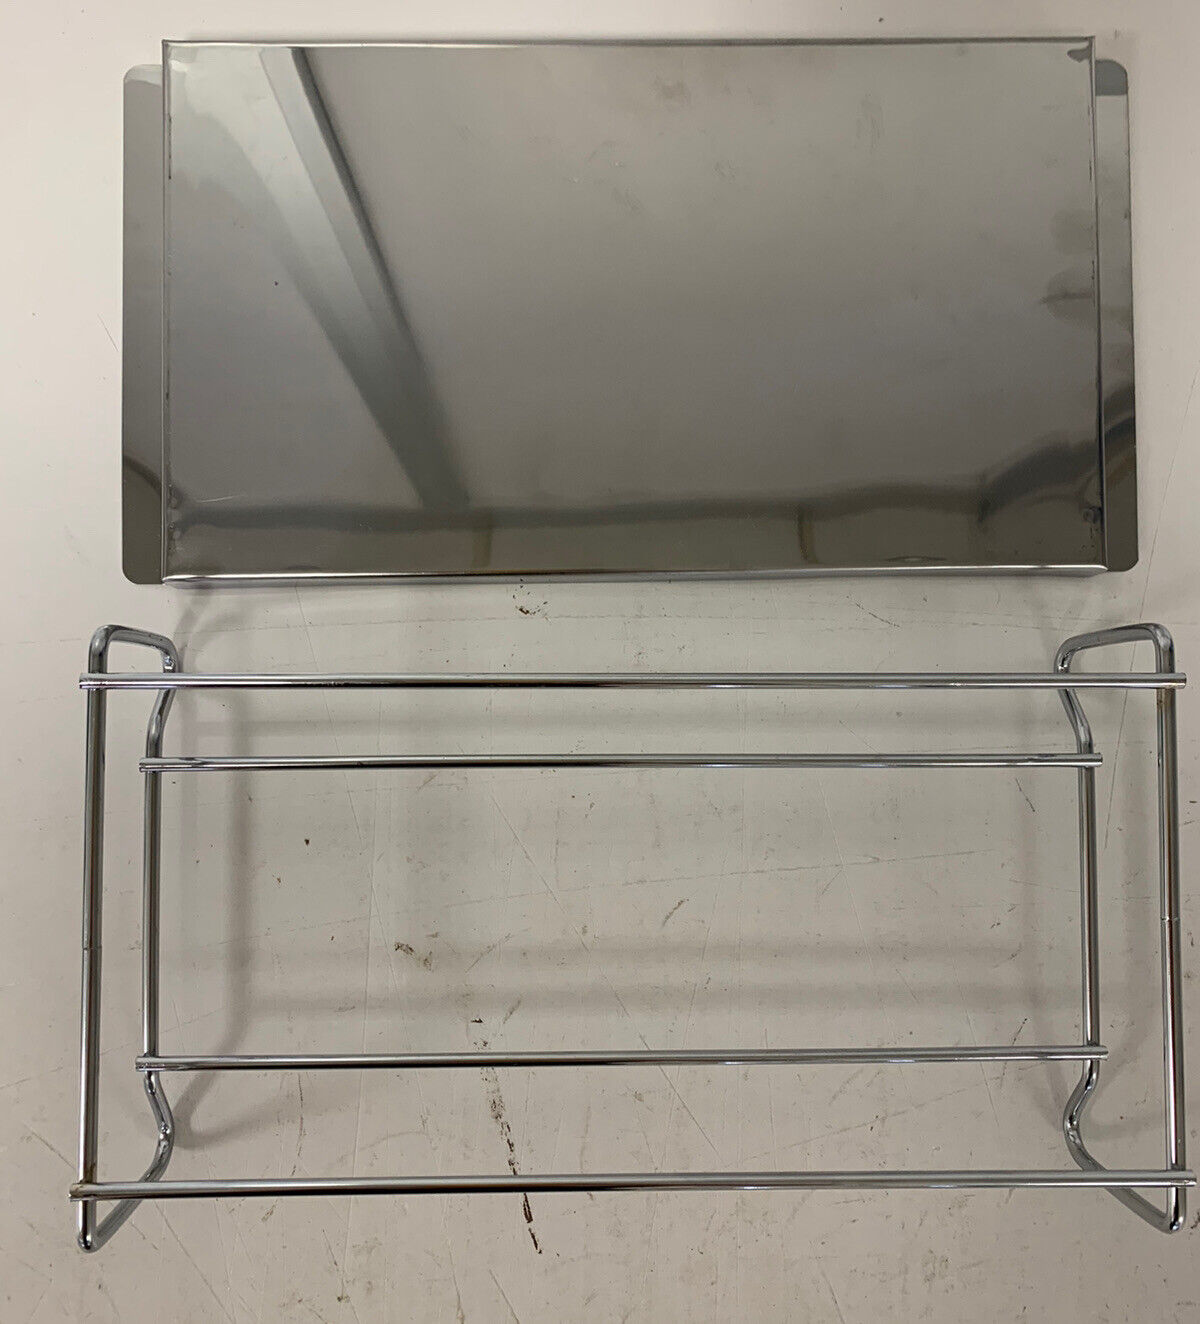 Kitchen tray with riser